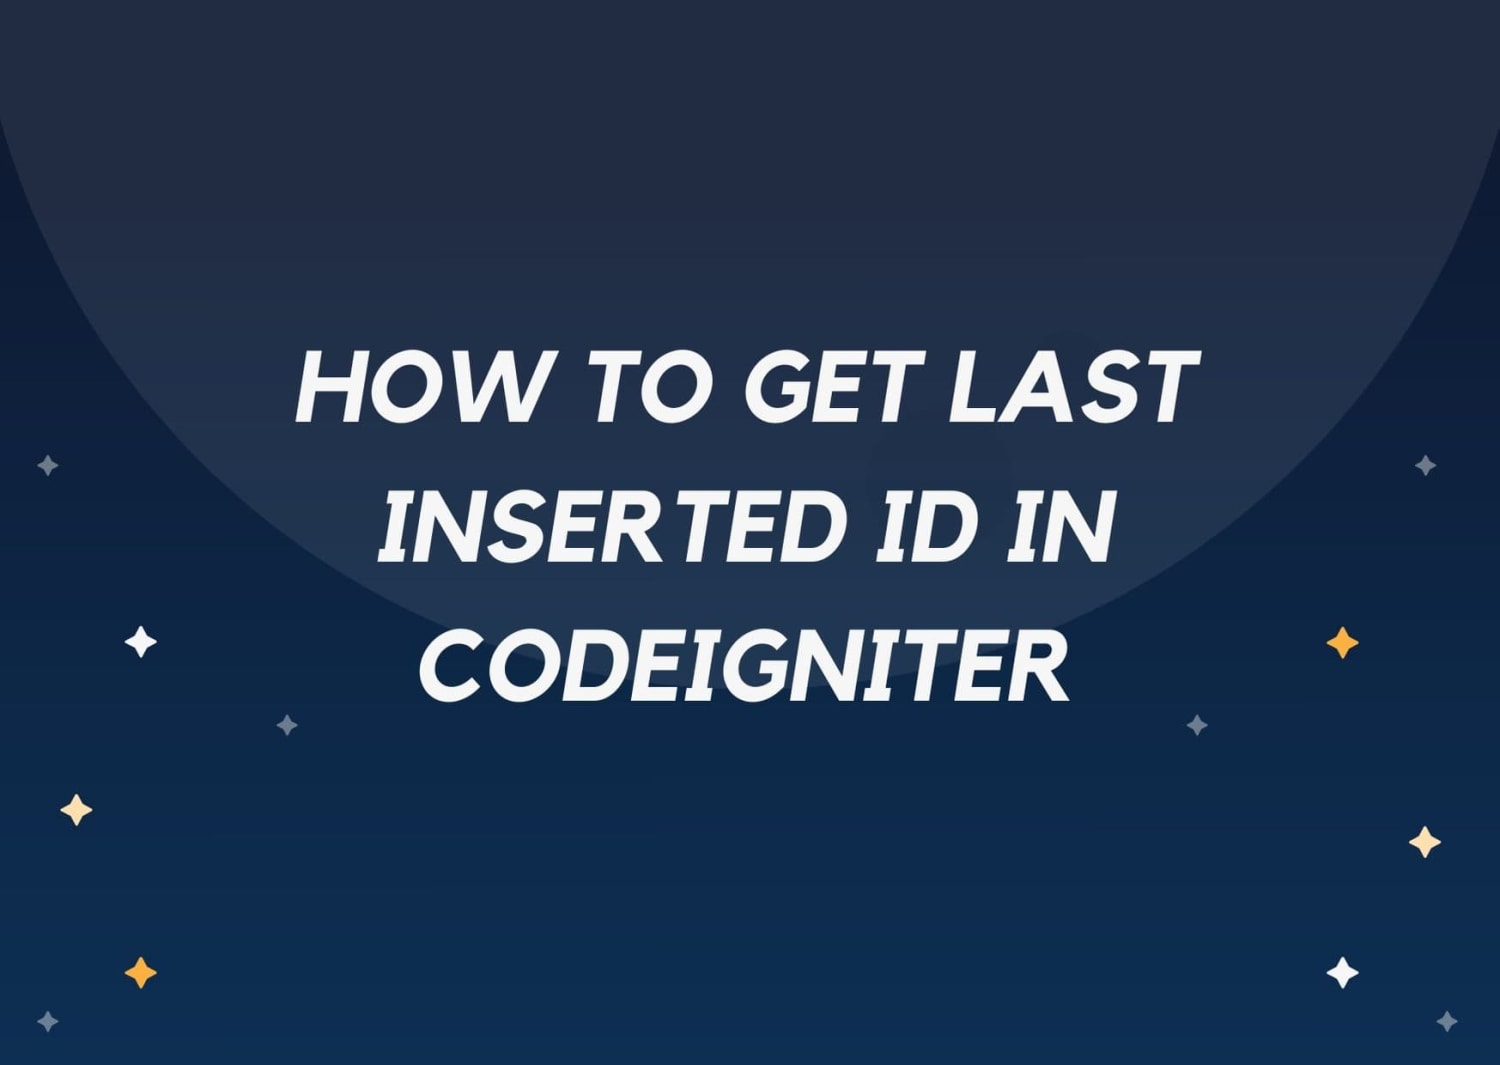 How to get last inserted id in Codeigniter?